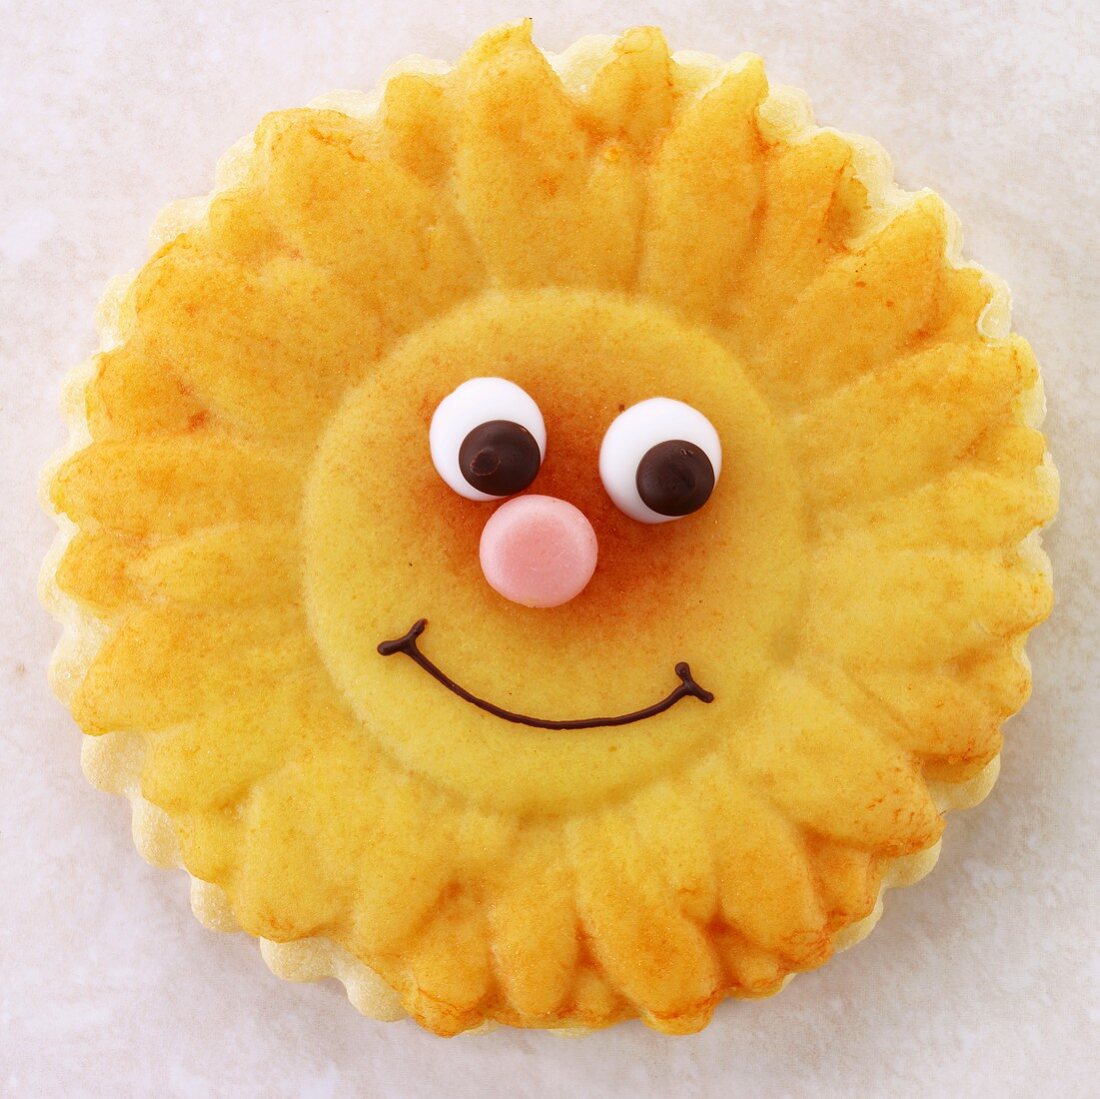 Biscuit in shape of sunflower with face